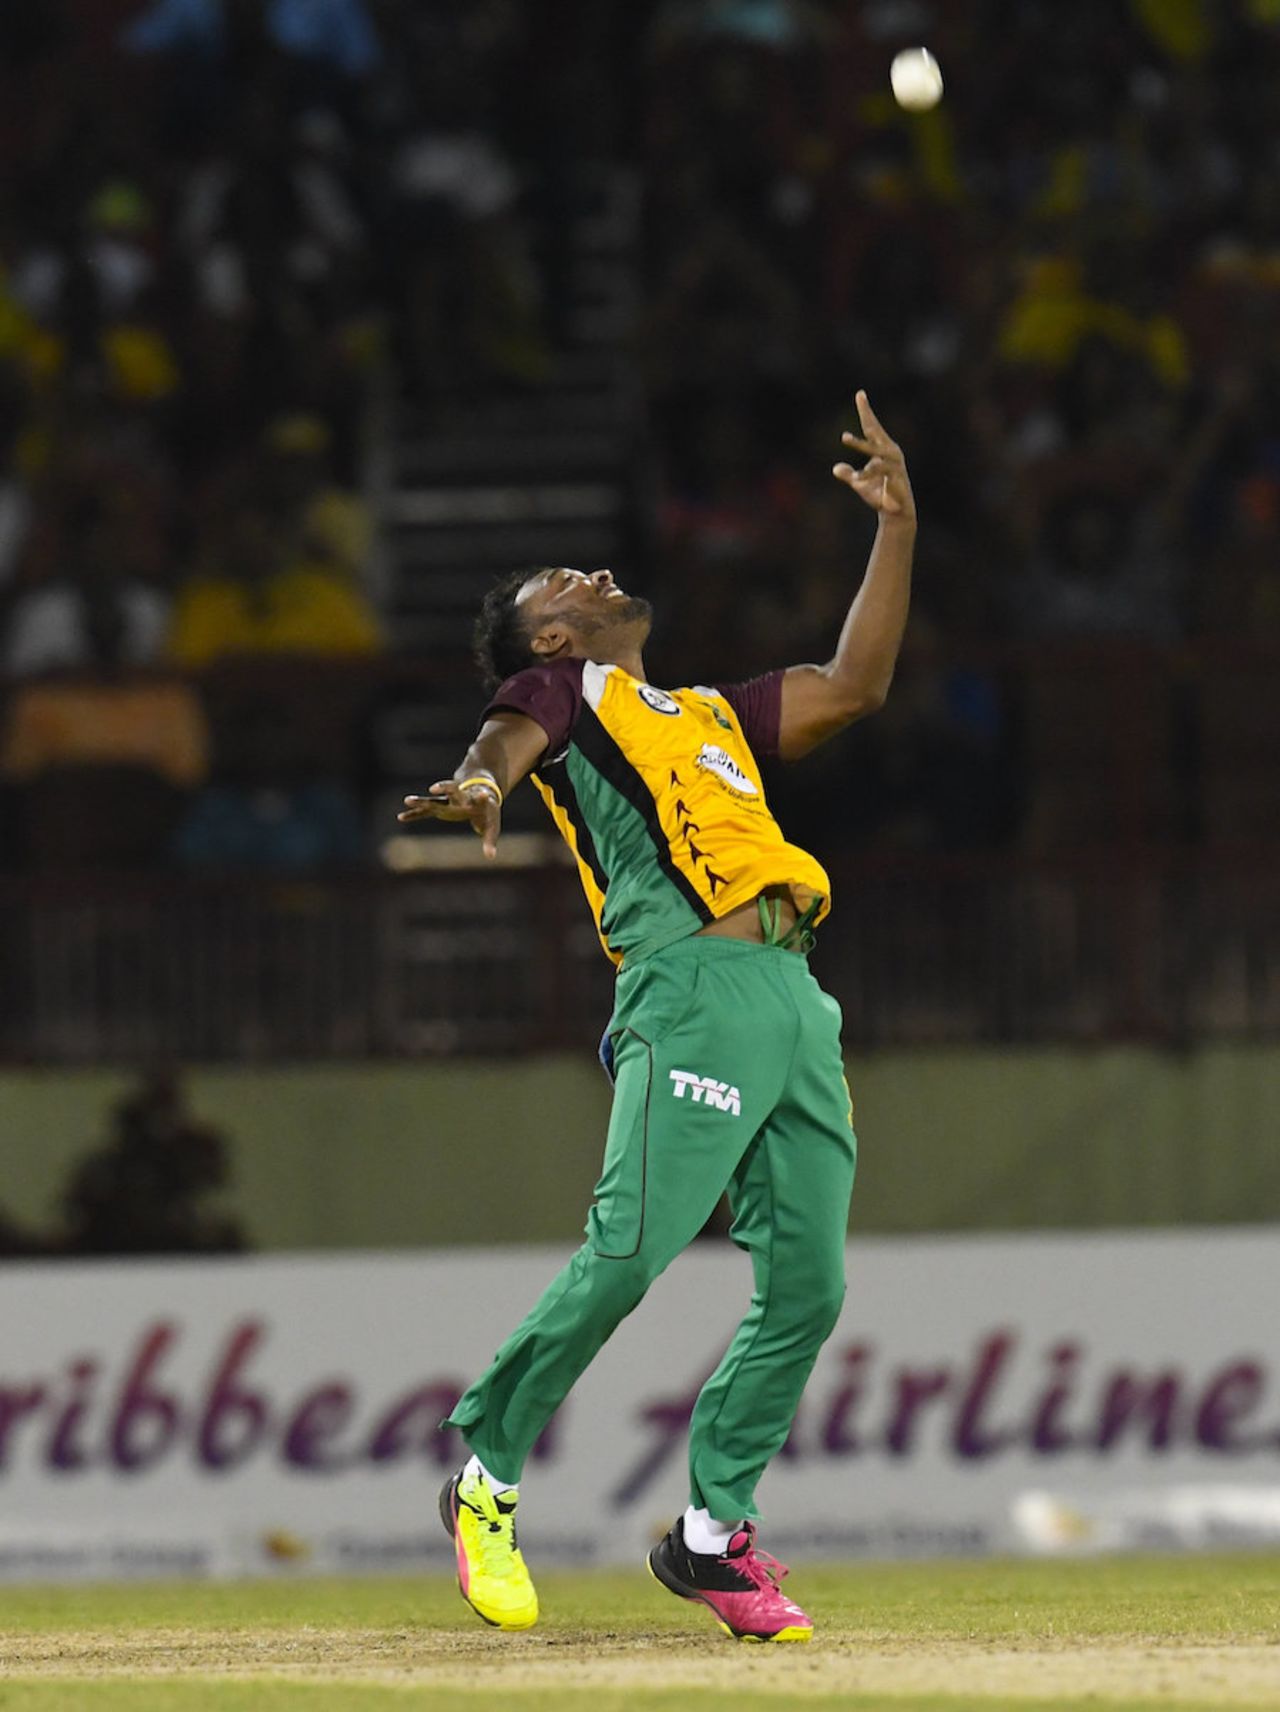 Veerasammy Permaul is thrilled after taking a sharp return catch, Guyana Amazon Warriors v Trinbago Knight Riders, CPL 2016, Providence, July 10, 2016